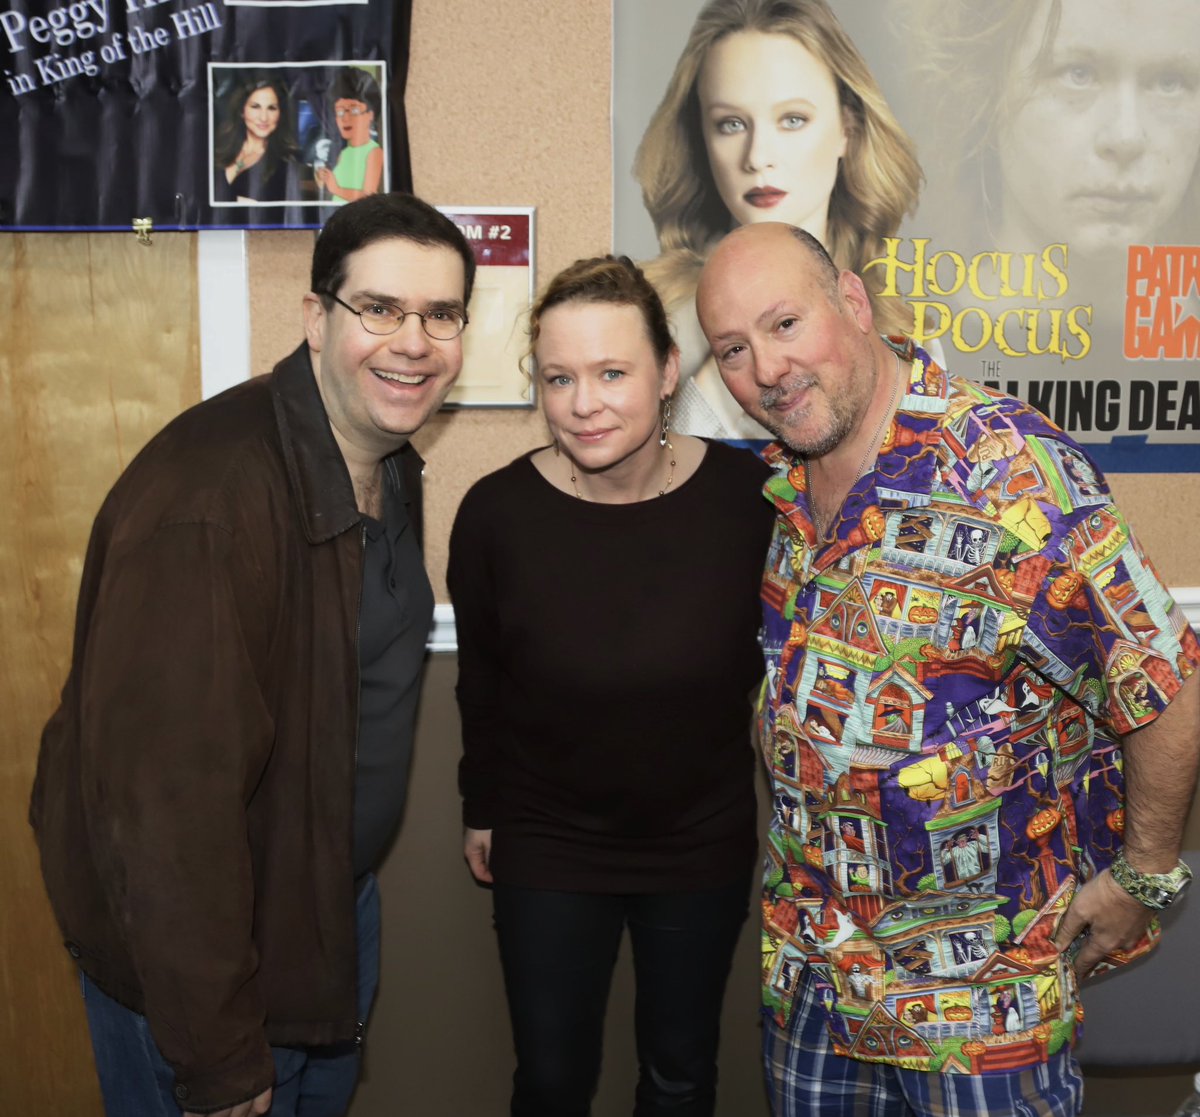 Me and Barry Brown meeting Thora Birch at NJ Horror Con, last weekend.